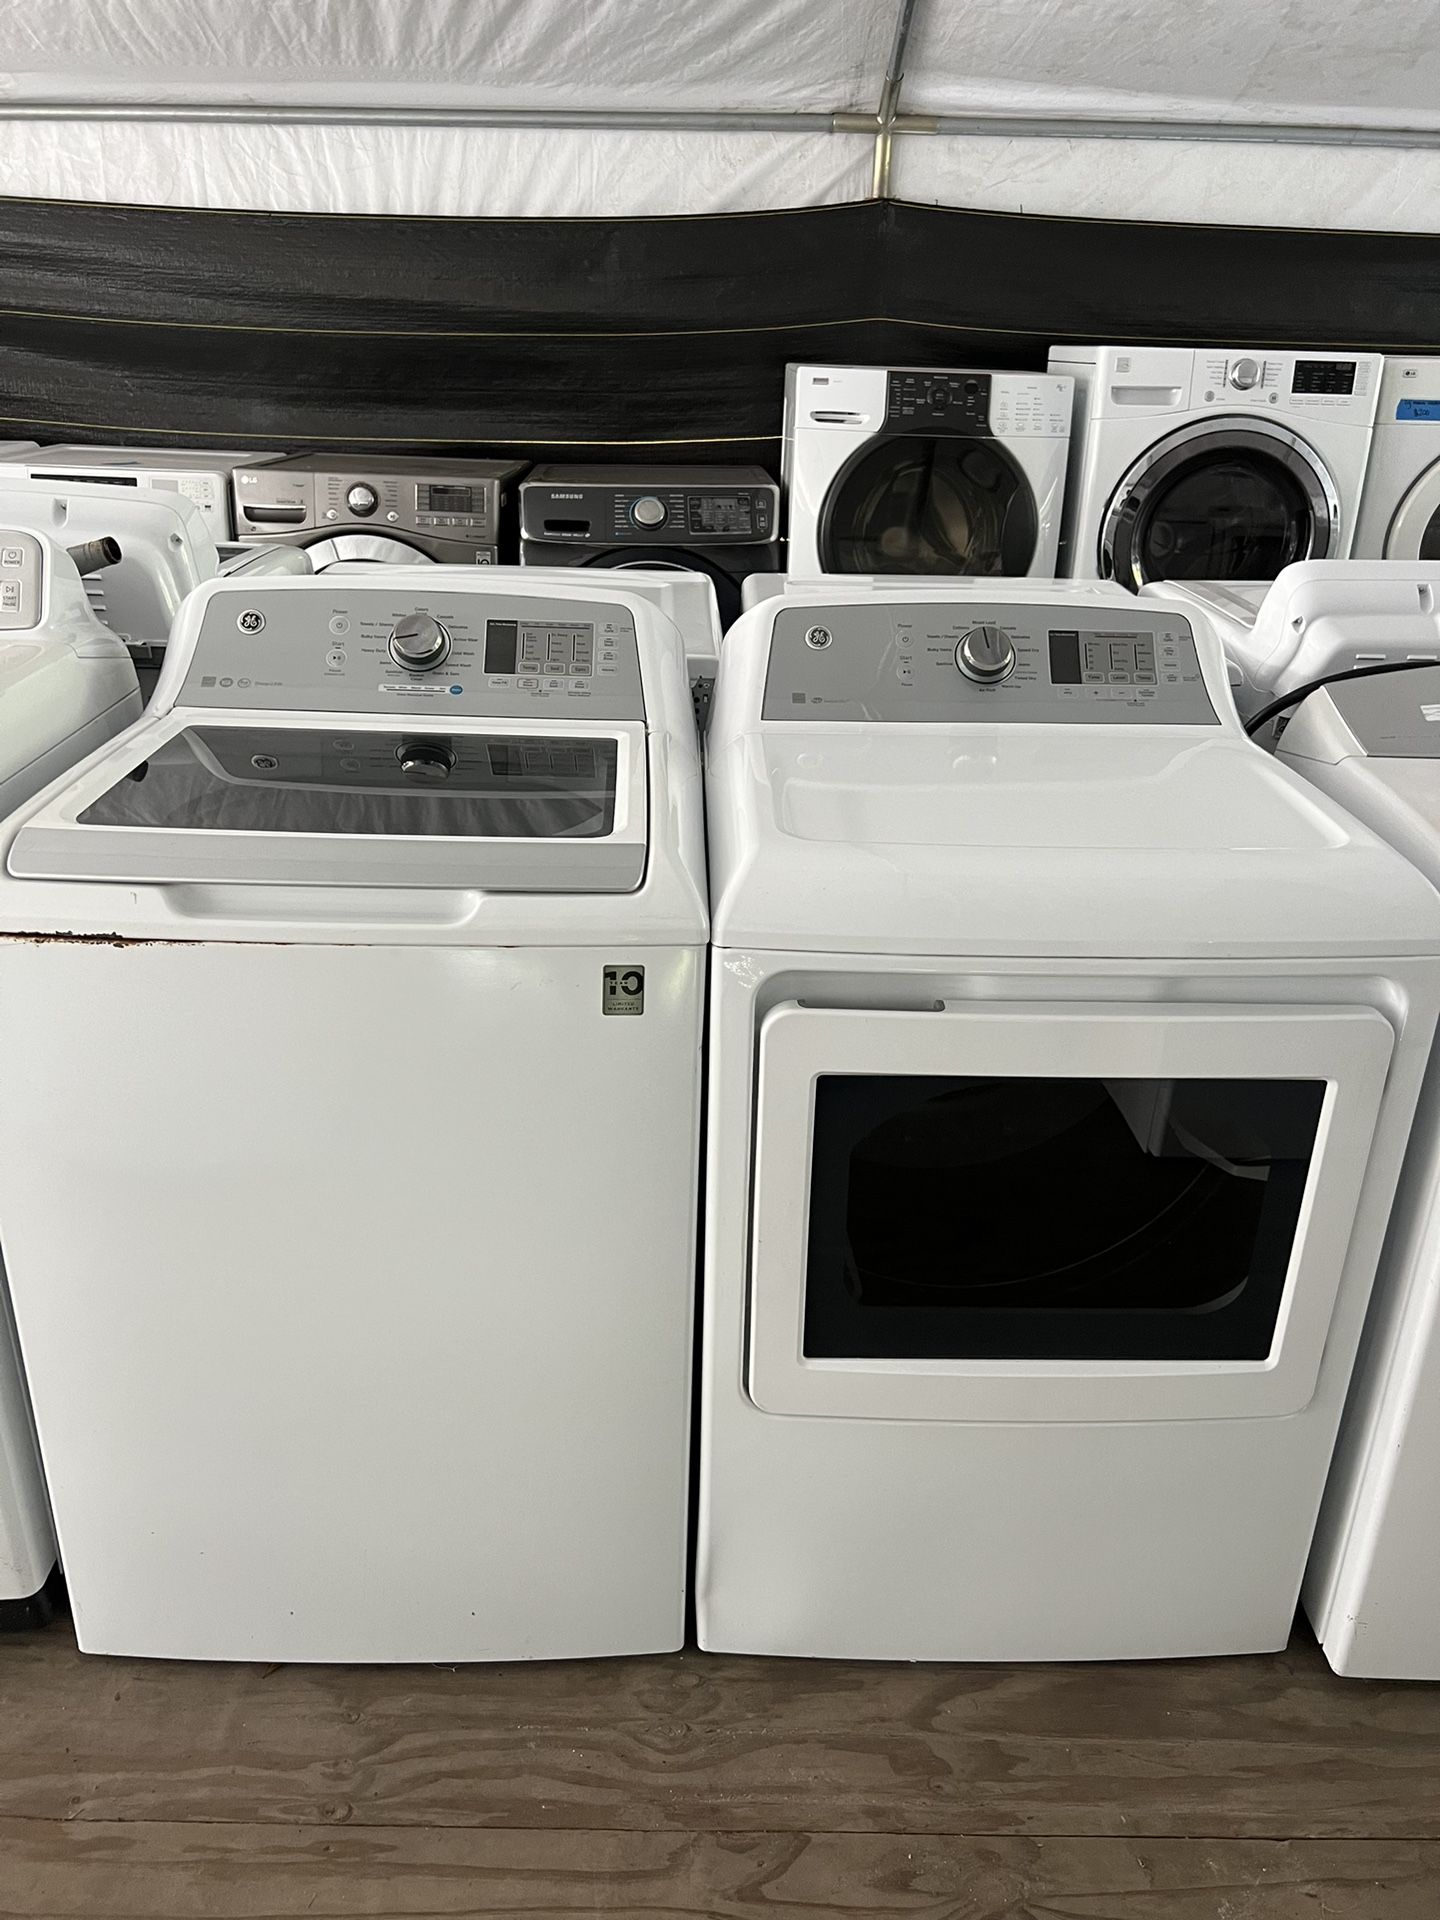 Ge Washer&Dryer Large Capacity  60 day warranty/ Located at:📍5415 Carmack Rd Tampa Fl 33610📍